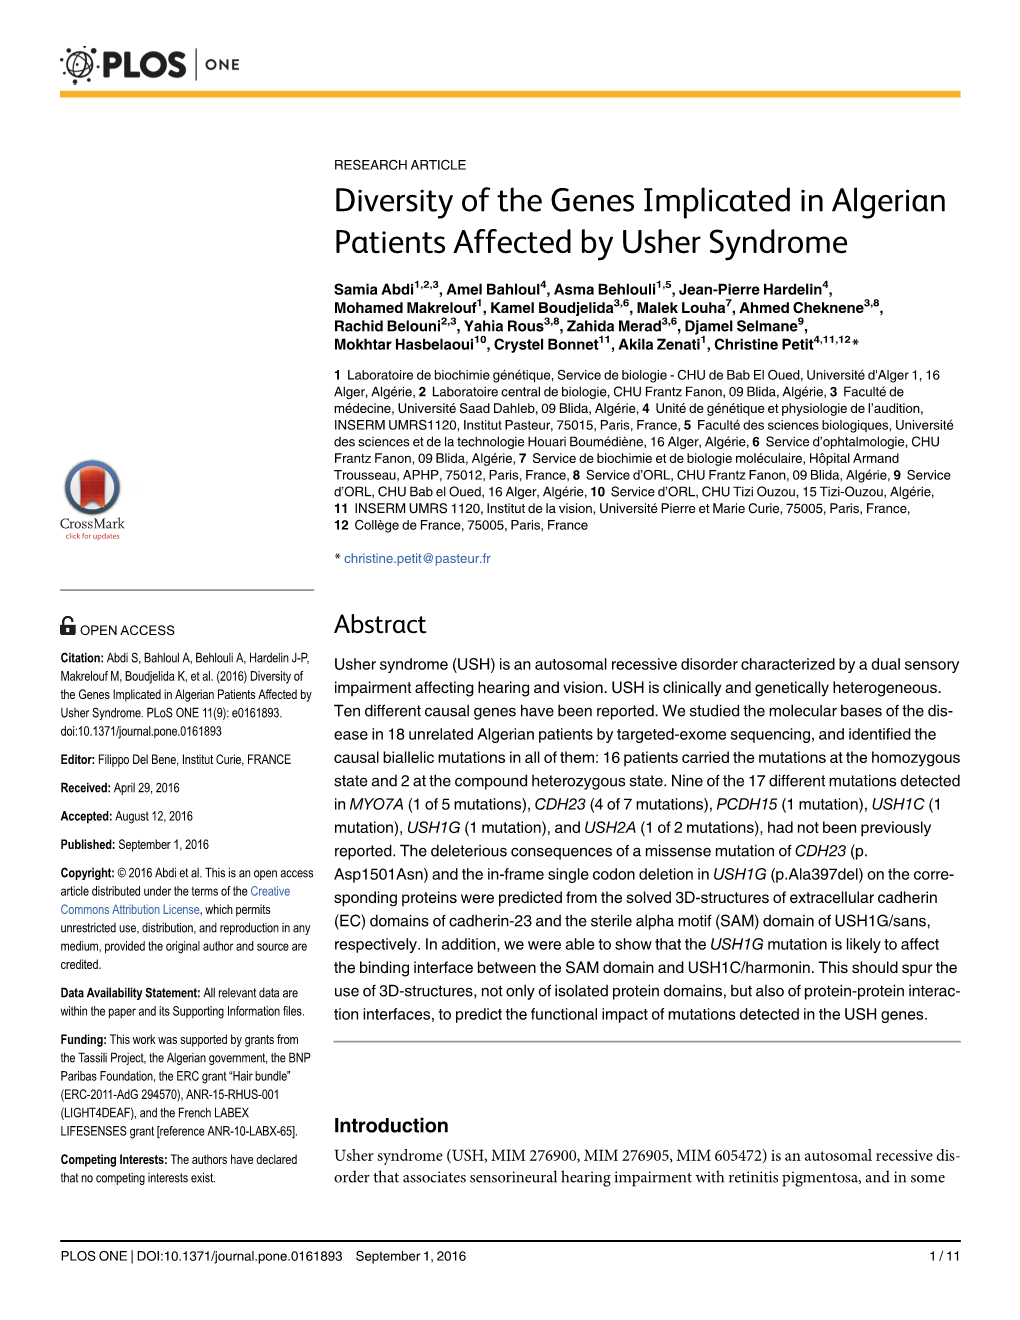 Diversity of the Genes Implicated in Algerian Patients Affected by Usher Syndrome